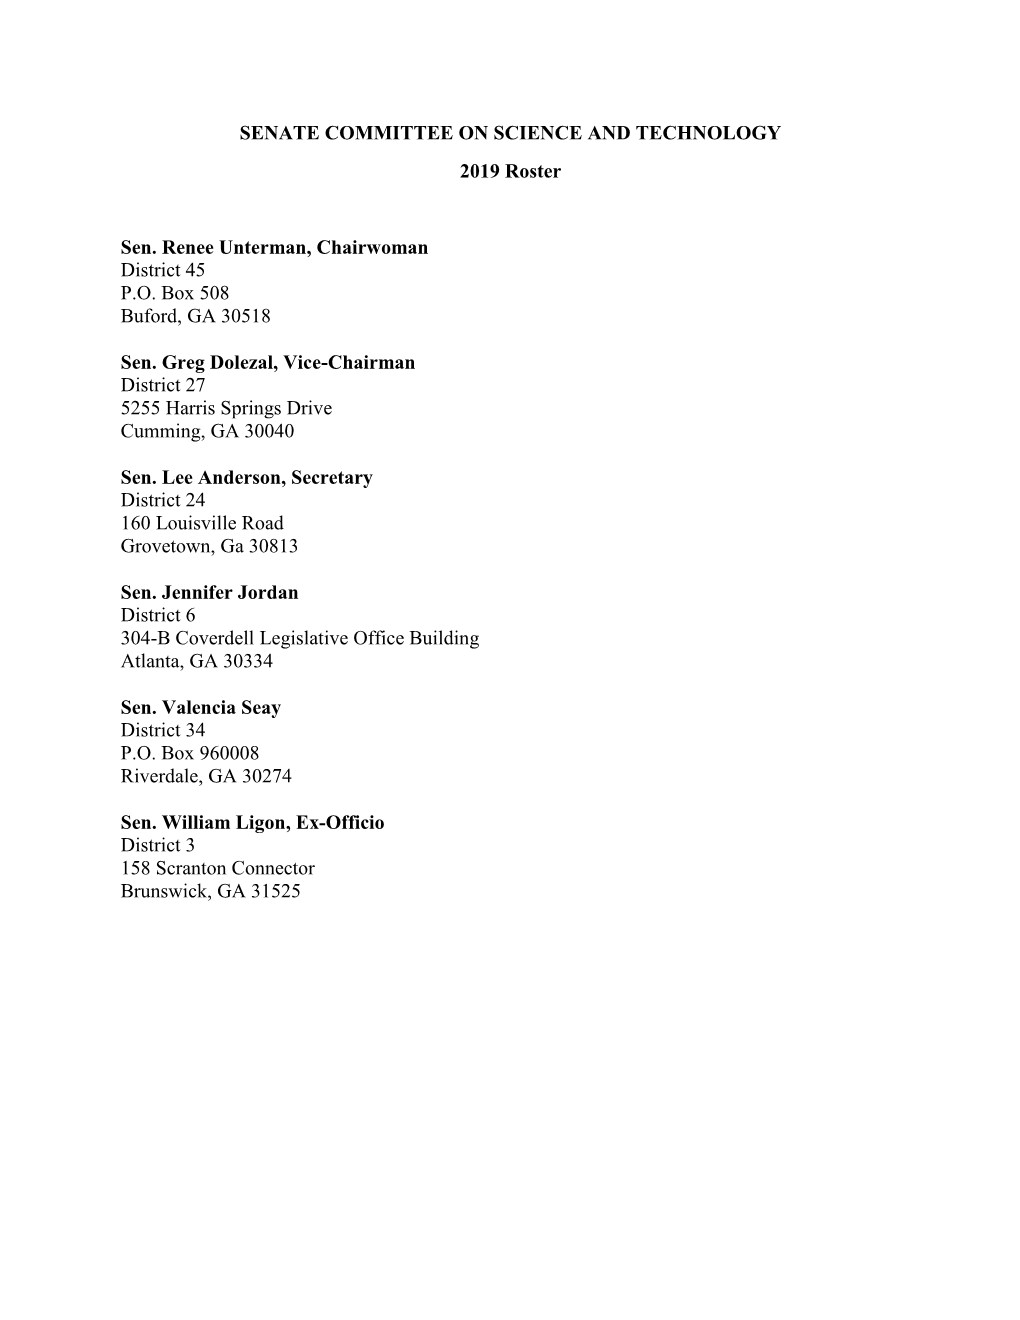 SENATE COMMITTEE on SCIENCE and TECHNOLOGY 2019 Roster